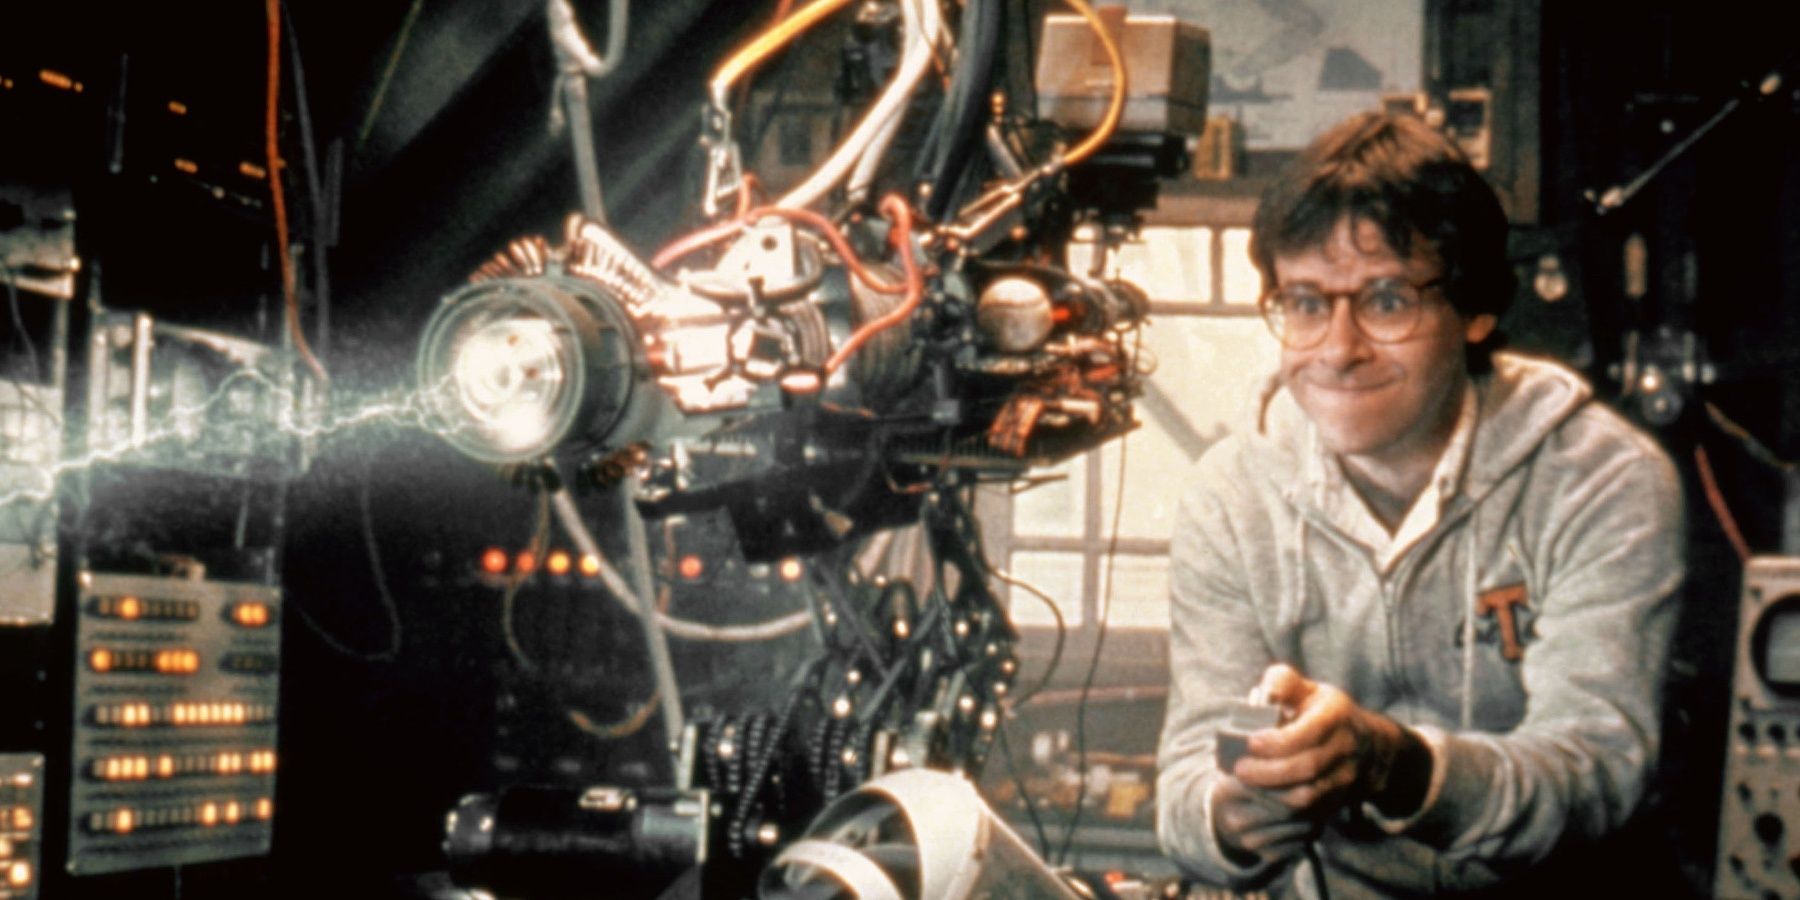 10 Things You Need To Know About The Making Of Honey I Shrunk The Kids